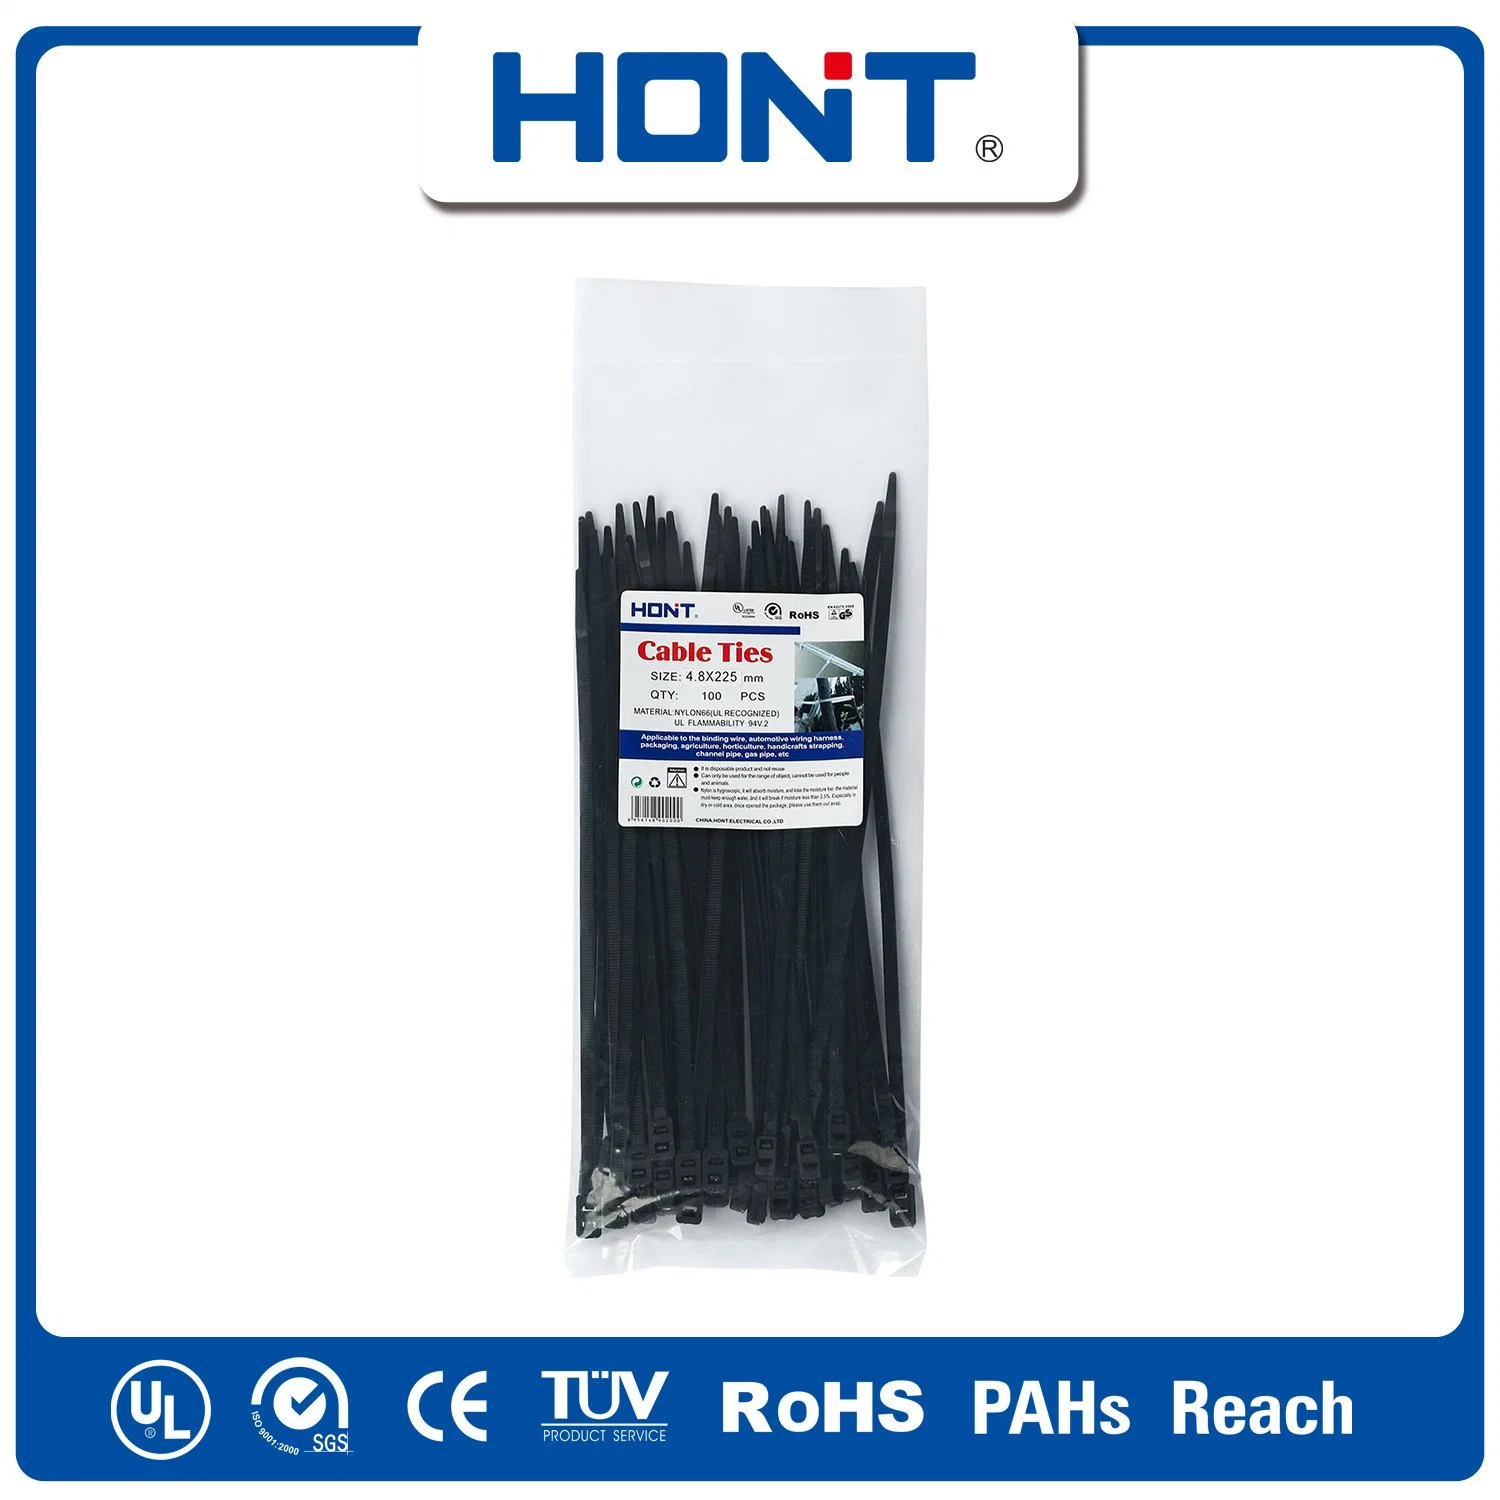 Self-Locking Tie Hont Plastic Bag + Sticker Exporting Carton/Tray Nylon Cable Accessories with ISO